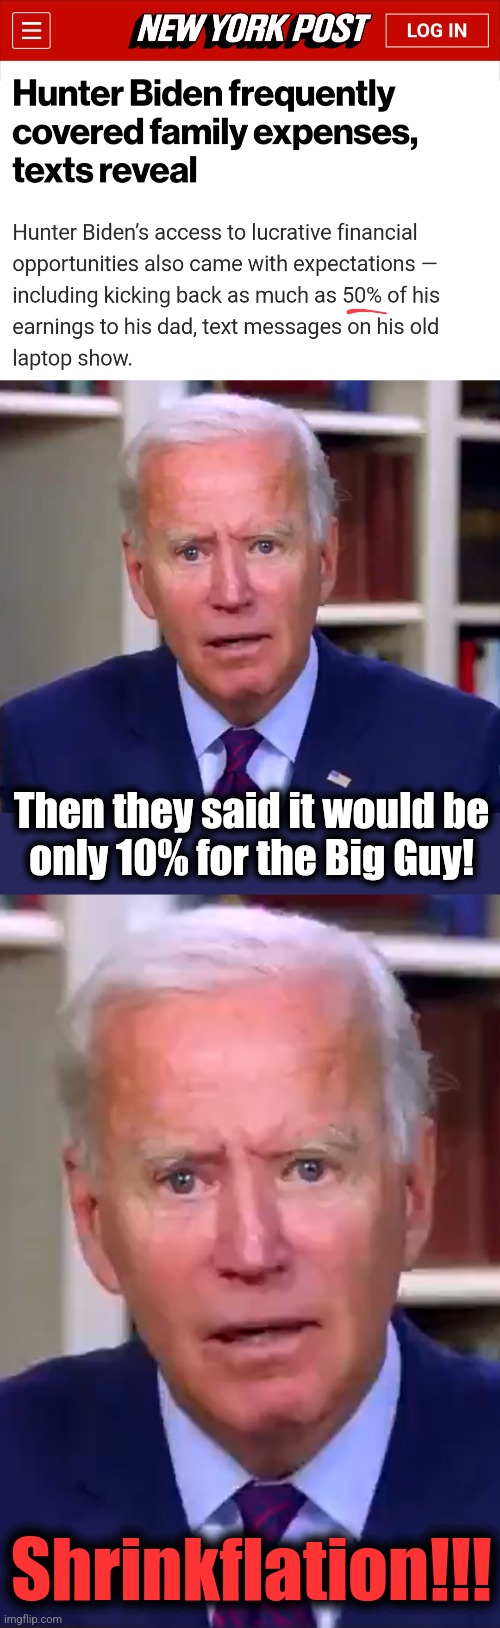 Shrinkflation! | Then they said it would be
only 10% for the Big Guy! Shrinkflation!!! | image tagged in slow joe biden dementia face,memes,corruption,democrats,hunter biden,shrinkflation | made w/ Imgflip meme maker